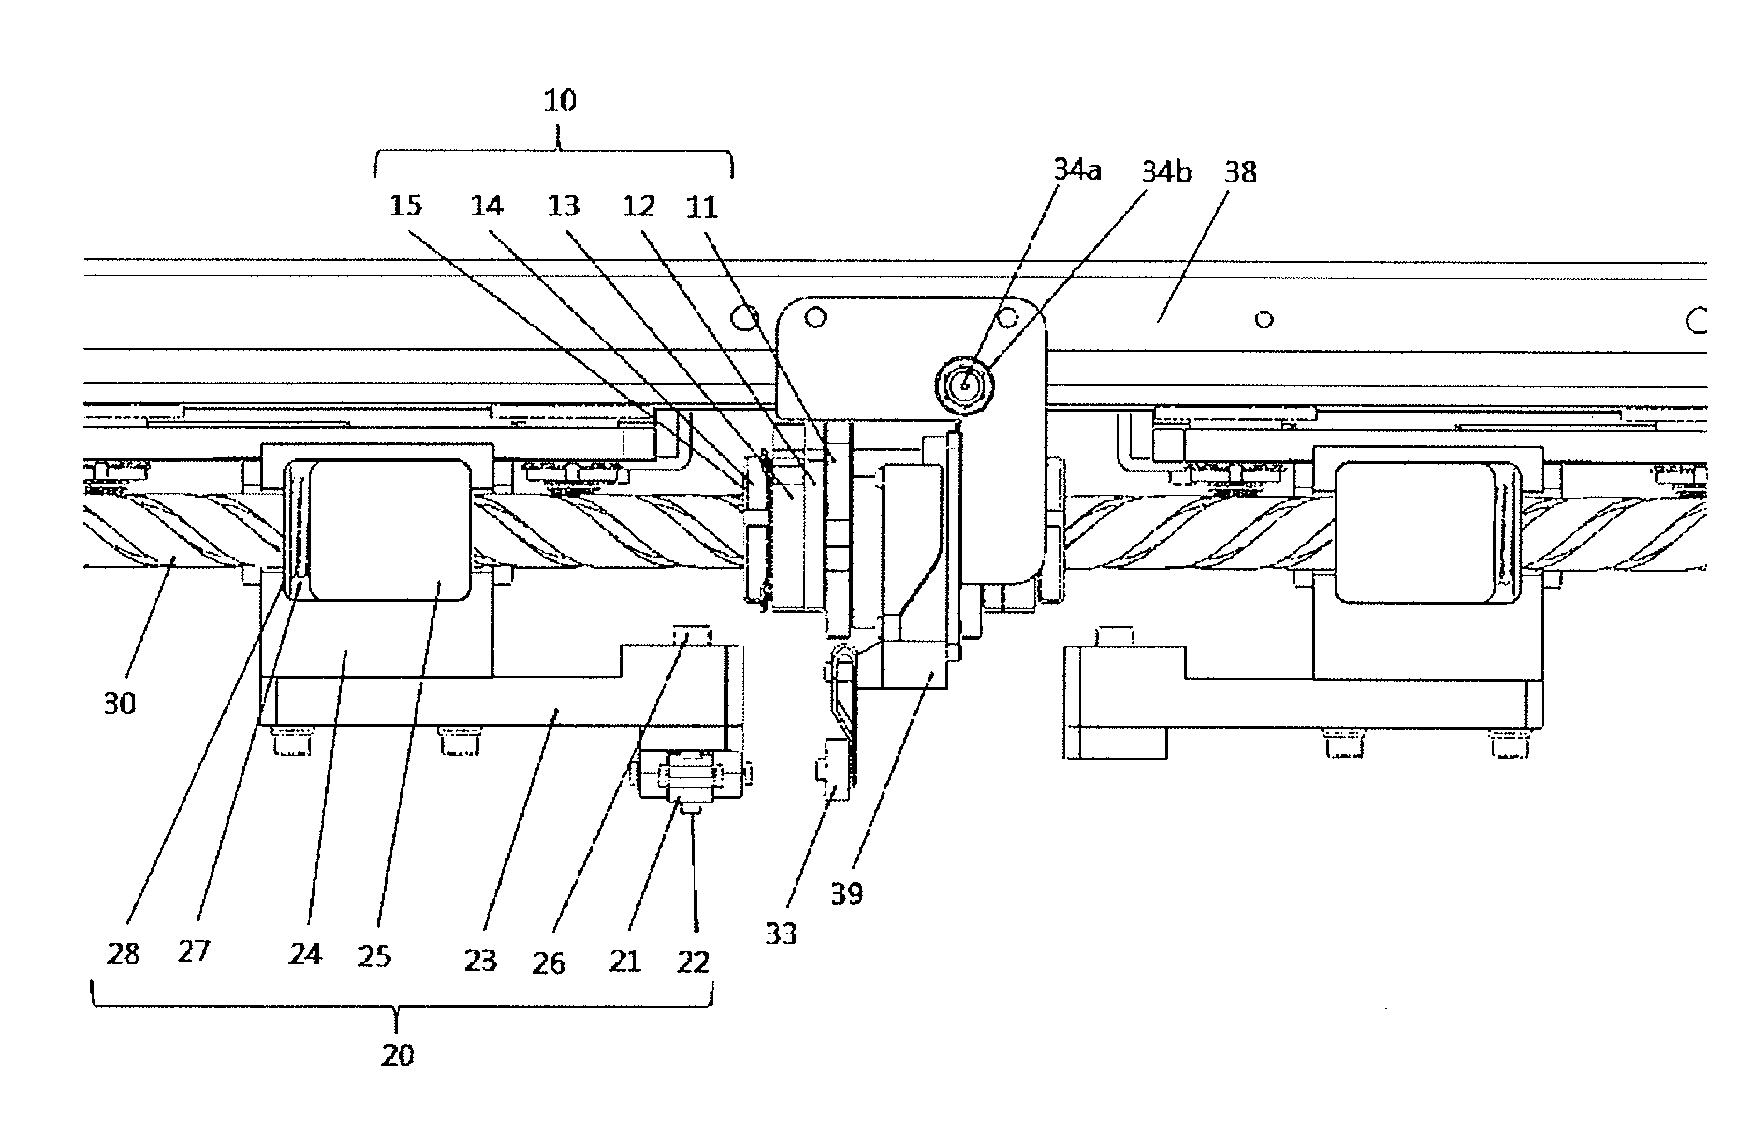 Electric door-locking system using a cam